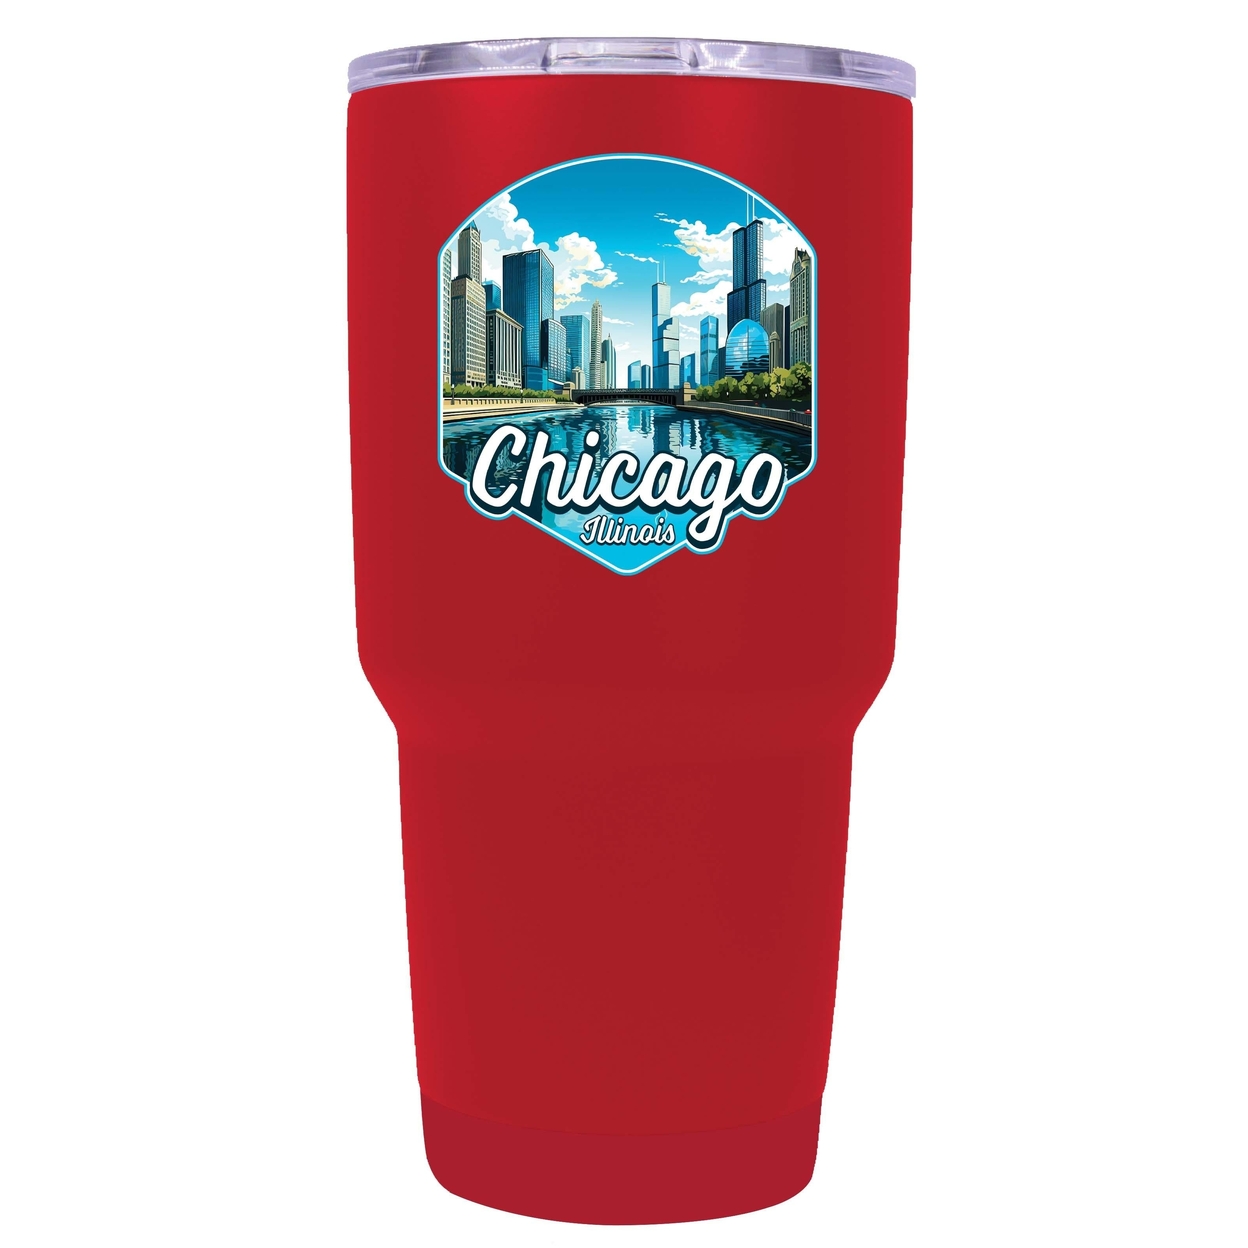 Chicago Illinois A Souvenir 24 Oz Insulated Tumbler - Red,,2-Pack